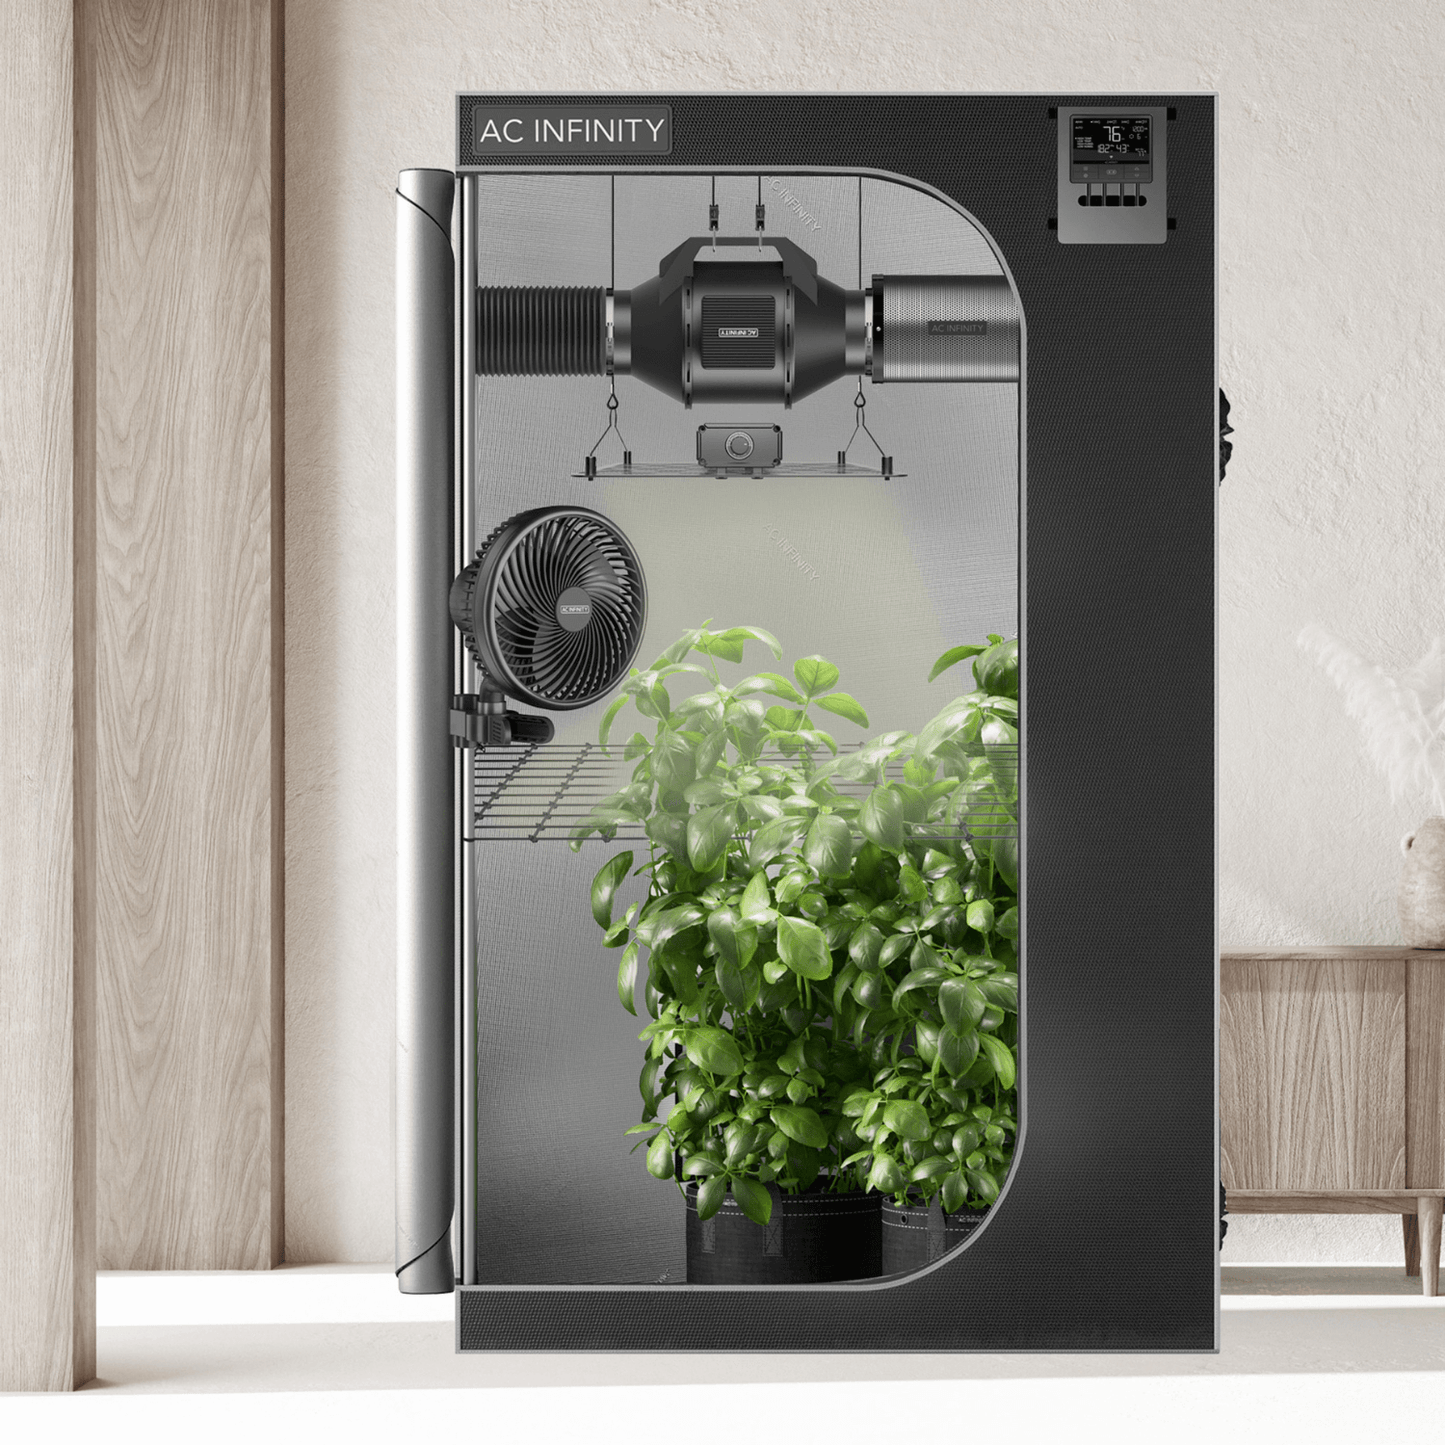 AC Infinity Advance Grow Tent System 2x2, 1-Plant Kit, Integrated Smart Controls to Automate Ventilation, Circulation, Full Spectrum LED Grow Light AC-PKB22 Kits